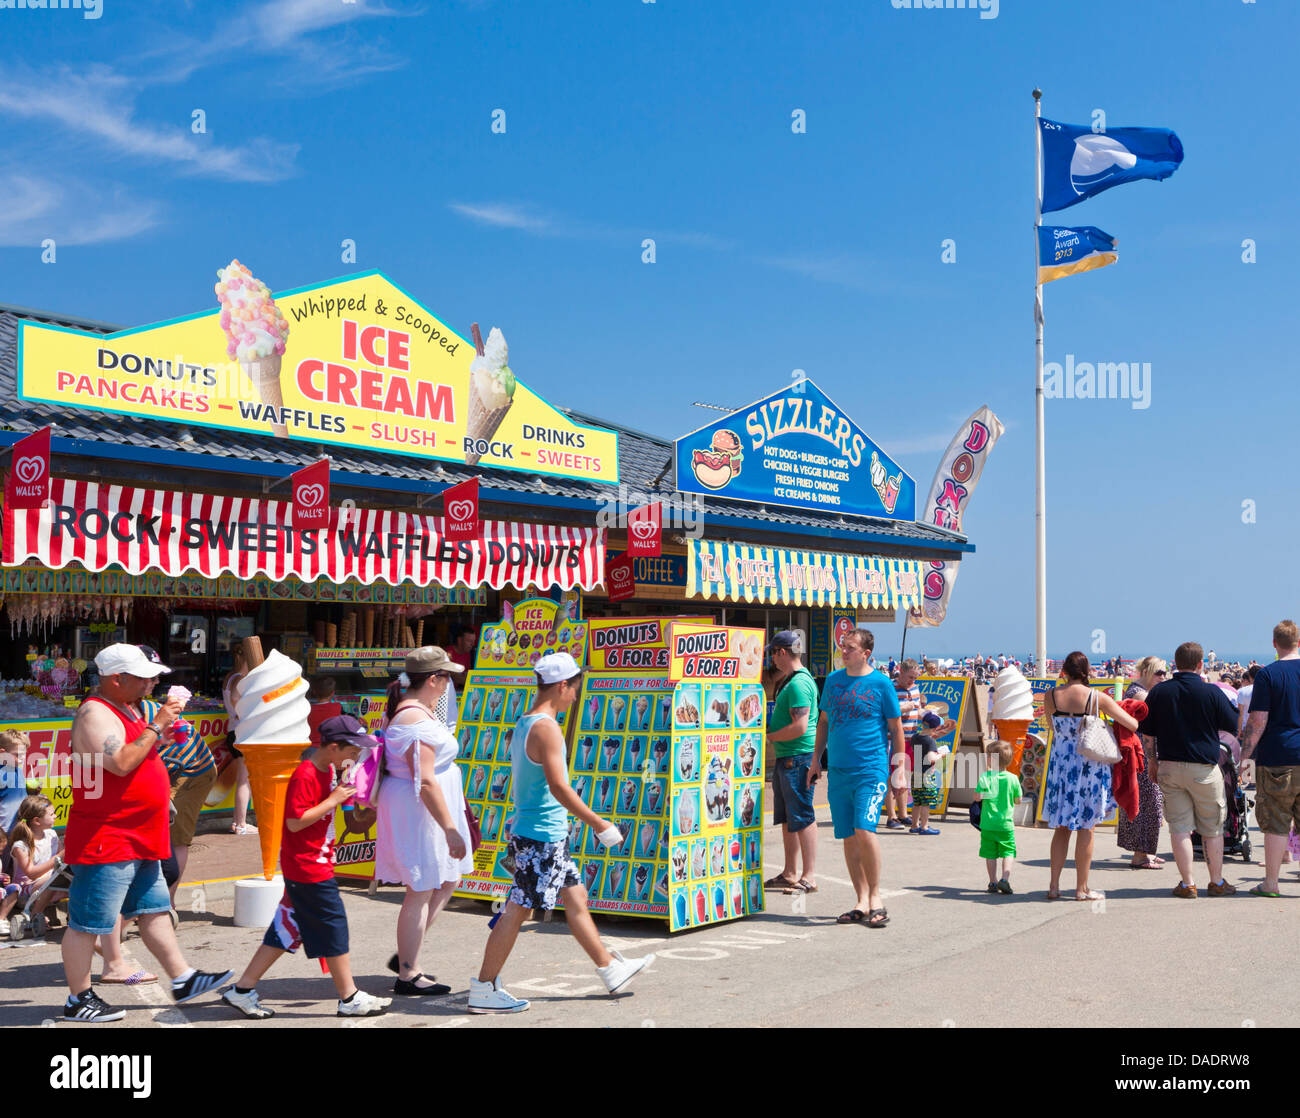 Beach take away food vendors seaside snack bars and ice cream stand at Skegness beach Lincolnshire England UK GB EU Europe Stock Photo